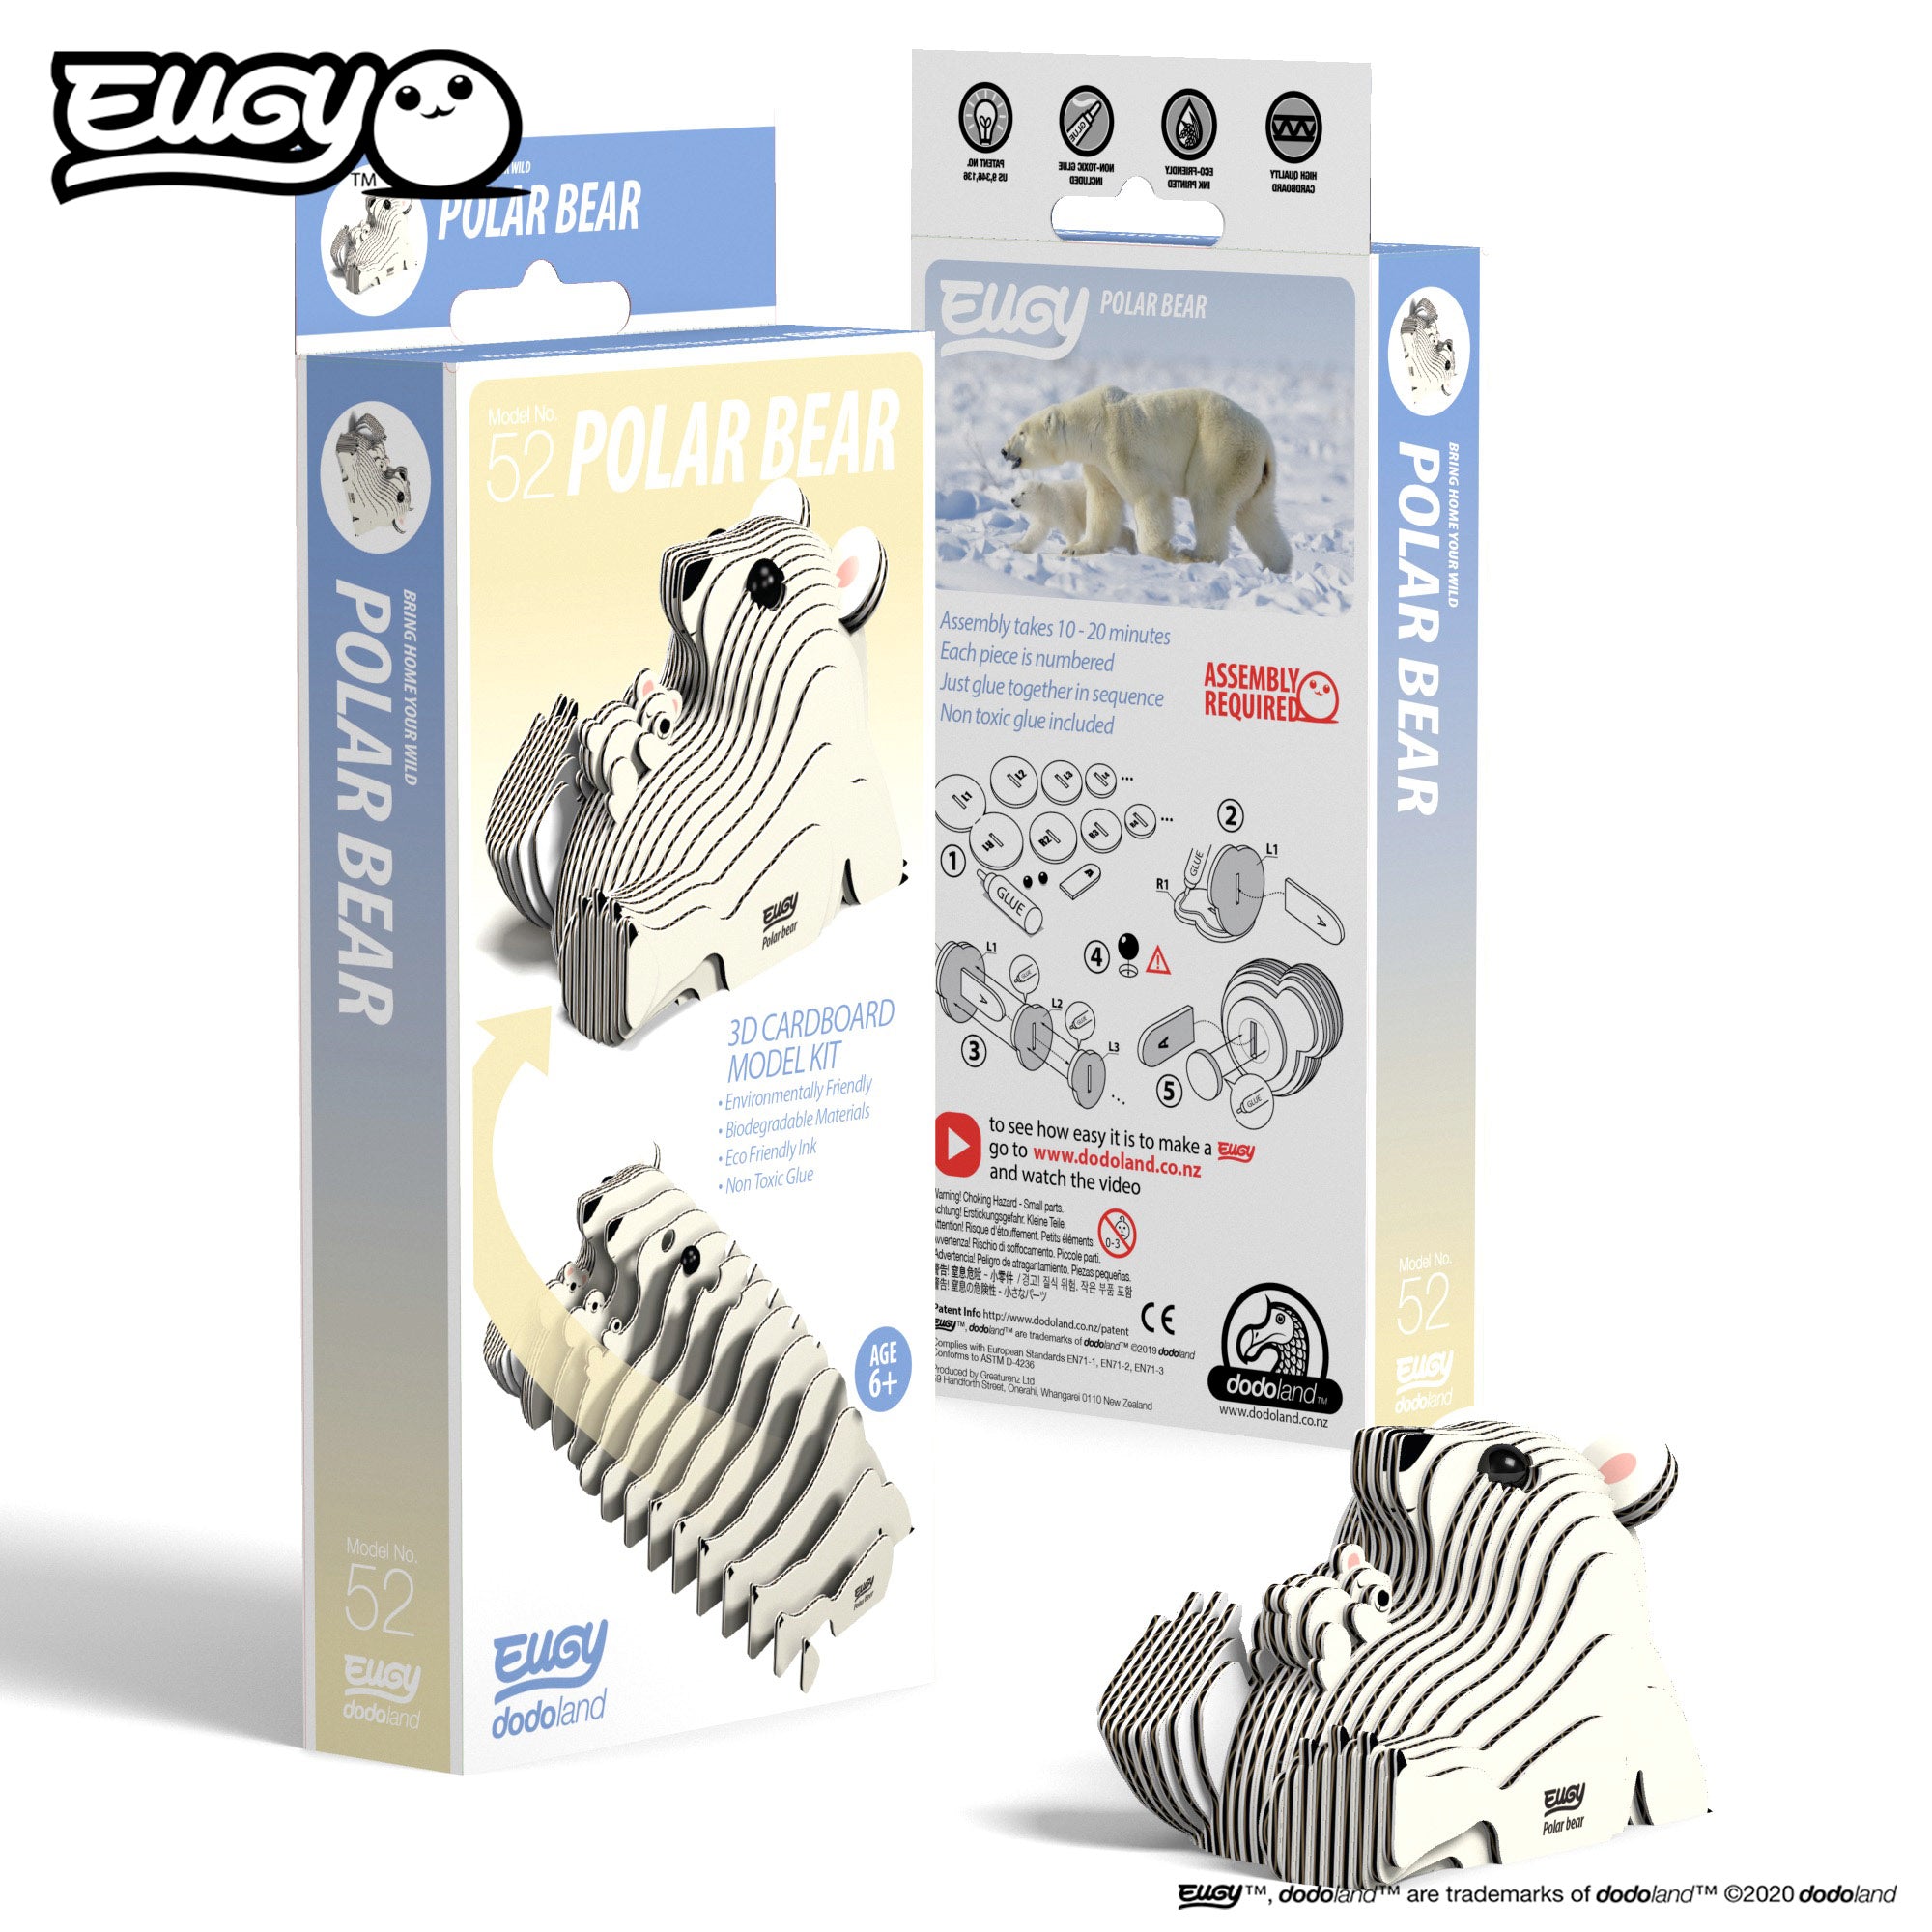 Image of an EUGY Polar Bear & Cub, facing slightly left and viewed from the front. In front of two EUGY Kangaroo Boxes, 1 showing the front cover and the other showing the rear of the box, against a white background